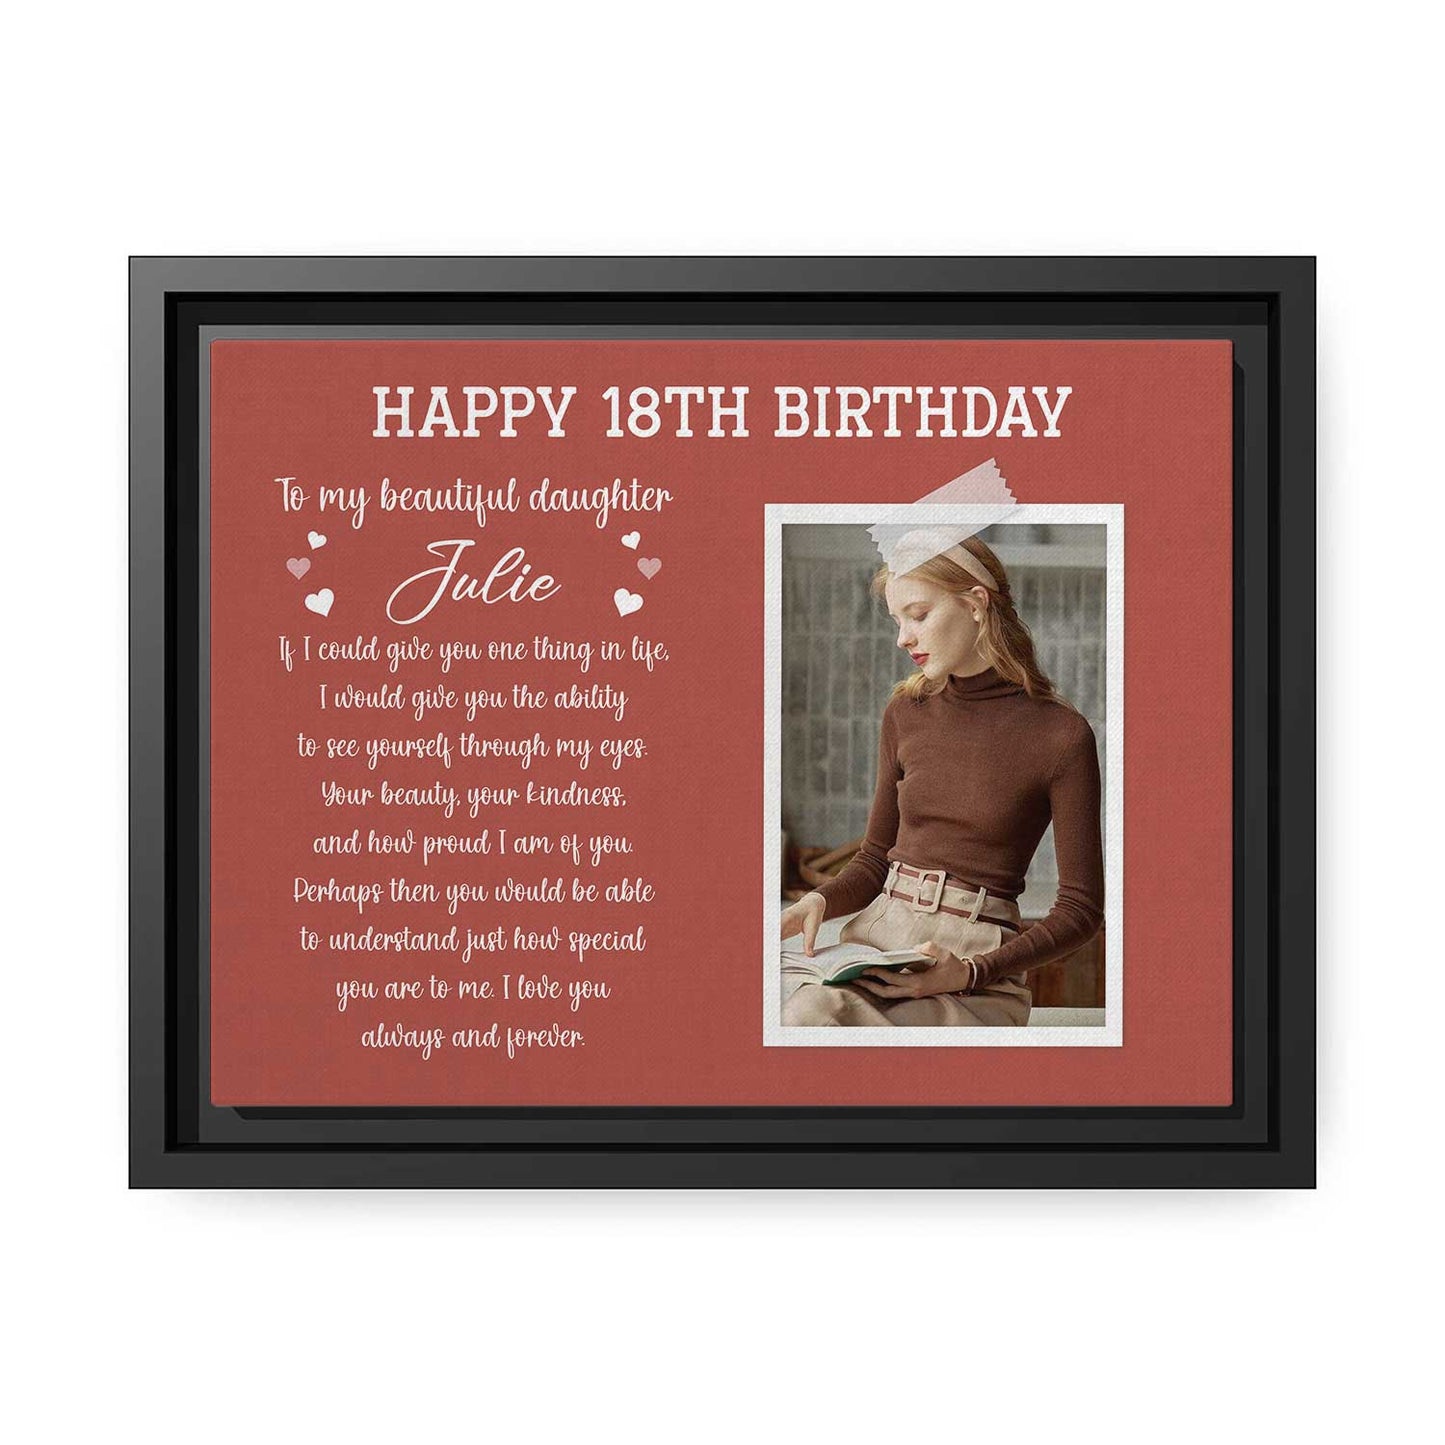 Happy 18th Birthday - Personalized 18th Birthday gift For Daughter - Custom Canvas Print - MyMindfulGifts